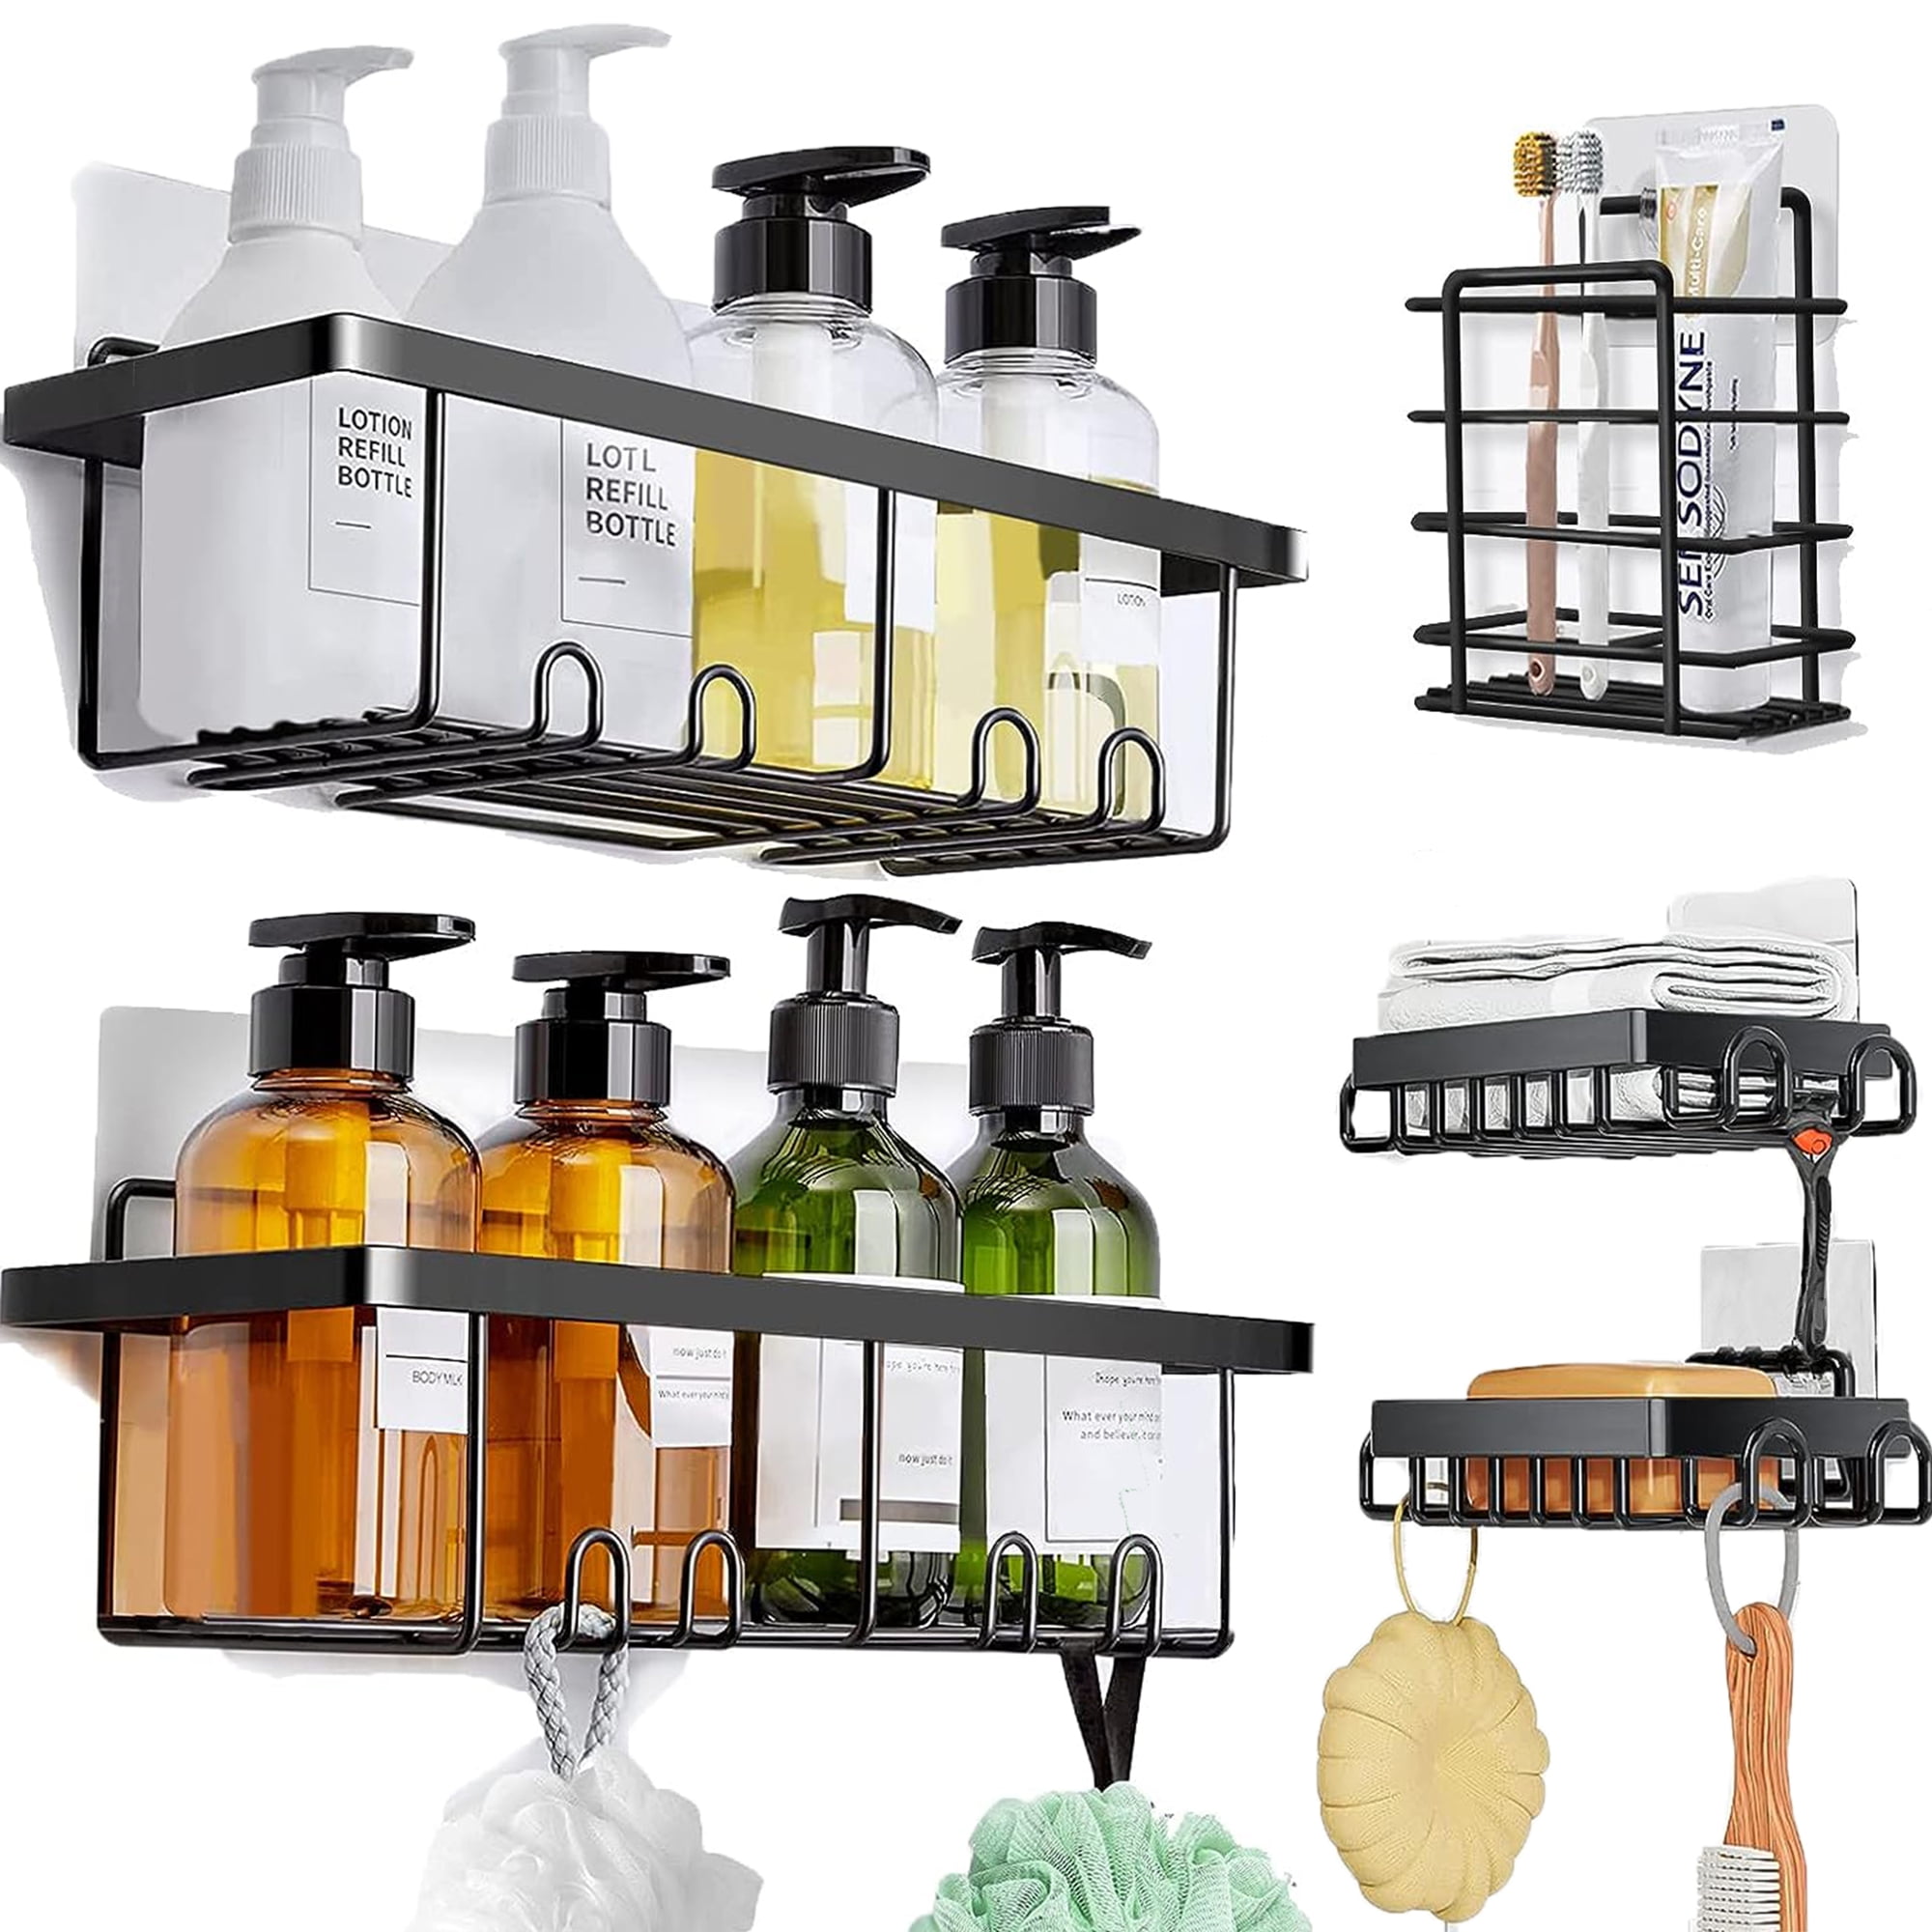 Orimade Adhesive Shower Caddy Soap Dish Holder Shelf with 5 Hooks Bathroom Organizer Basket Kitchen Storage Rack Wall Mounted No Drilling Stainless